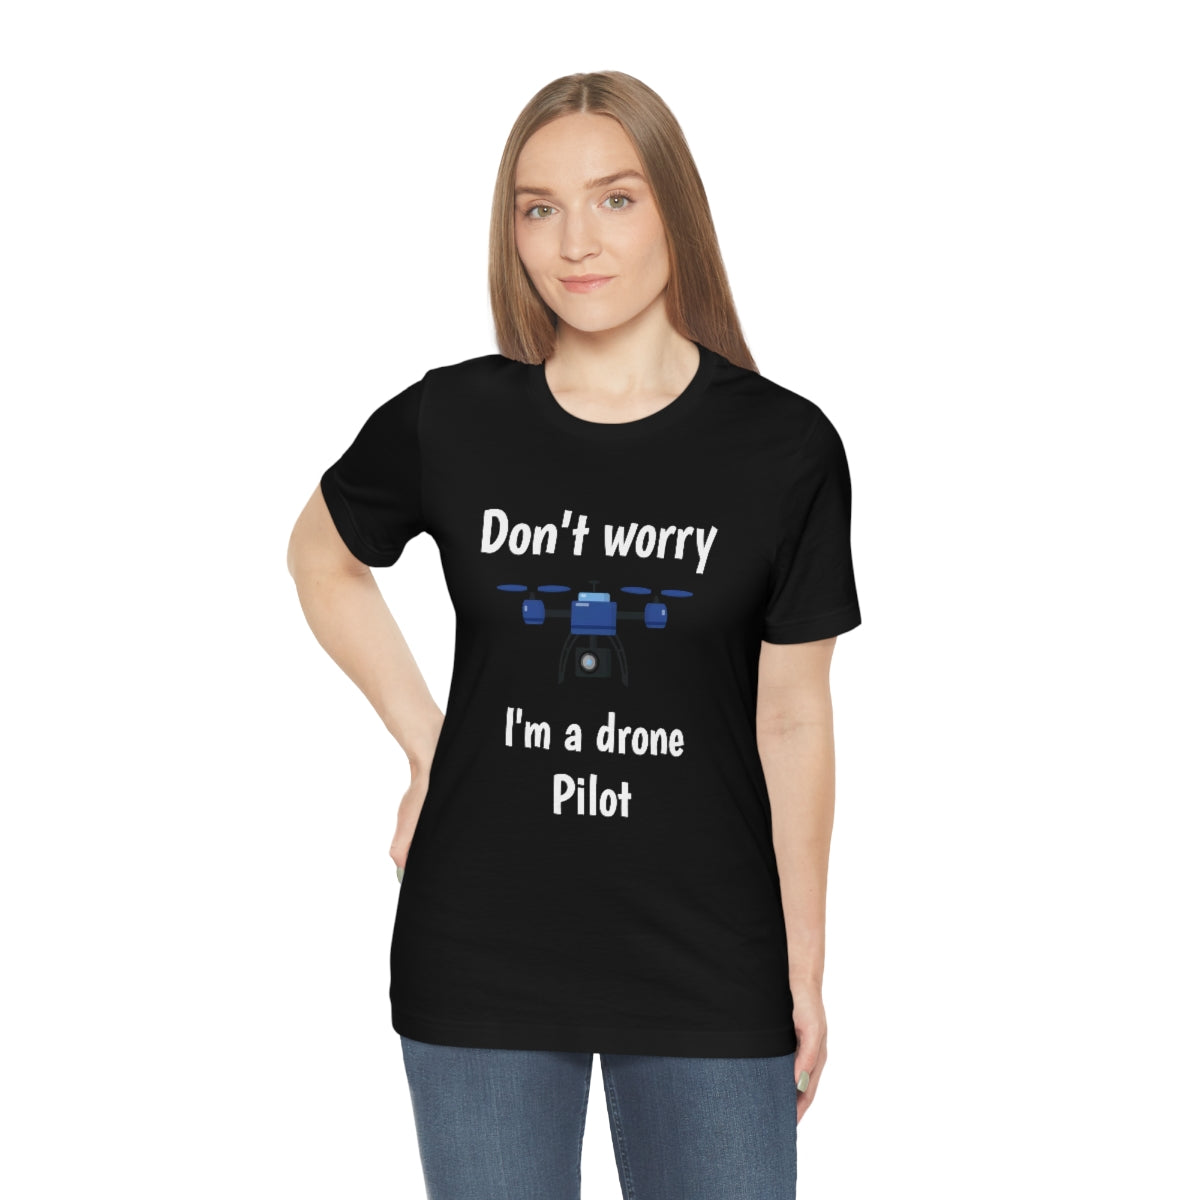 Don't worry I'm a drone pilot - Funny Short Sleeve Tee